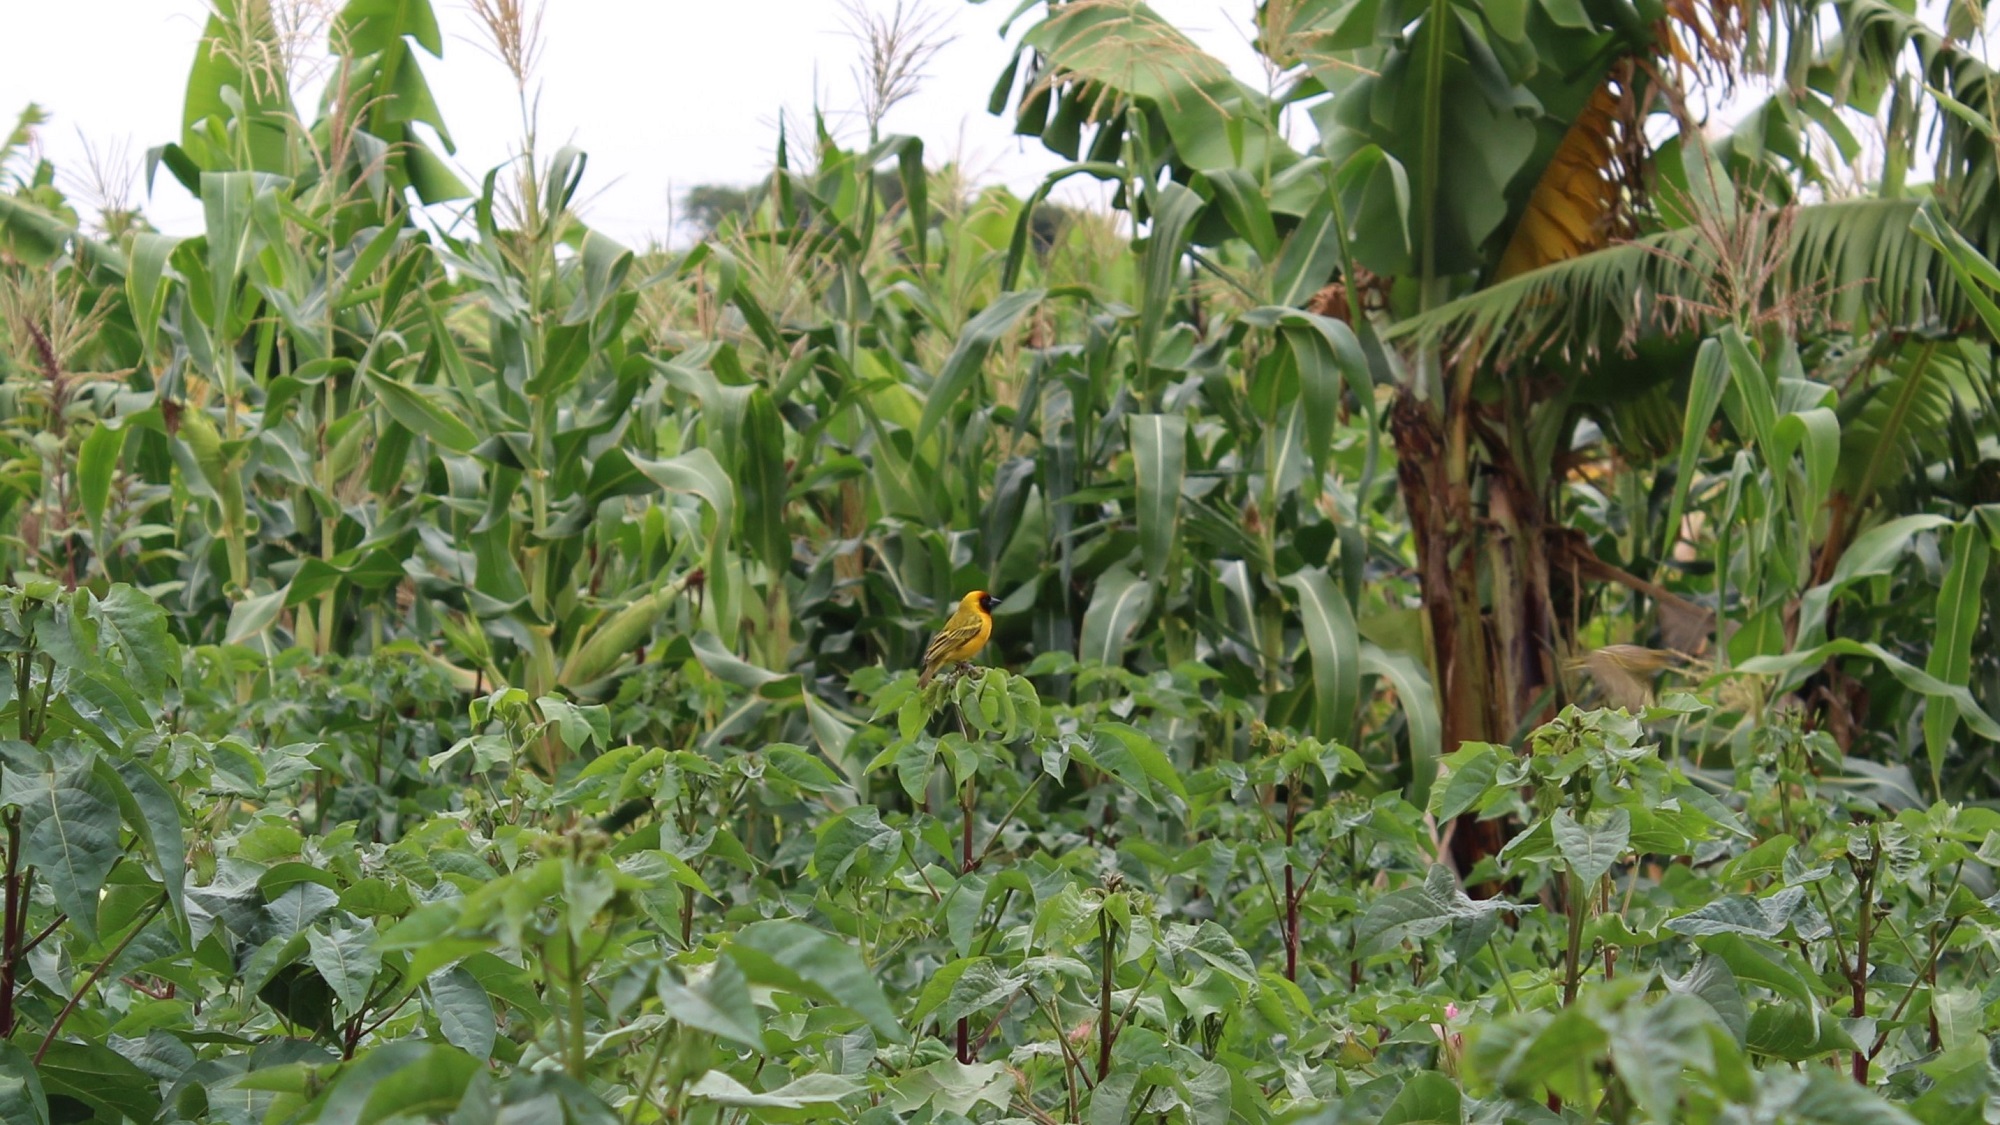 Maize and banana planted alongside cotton for increased food security